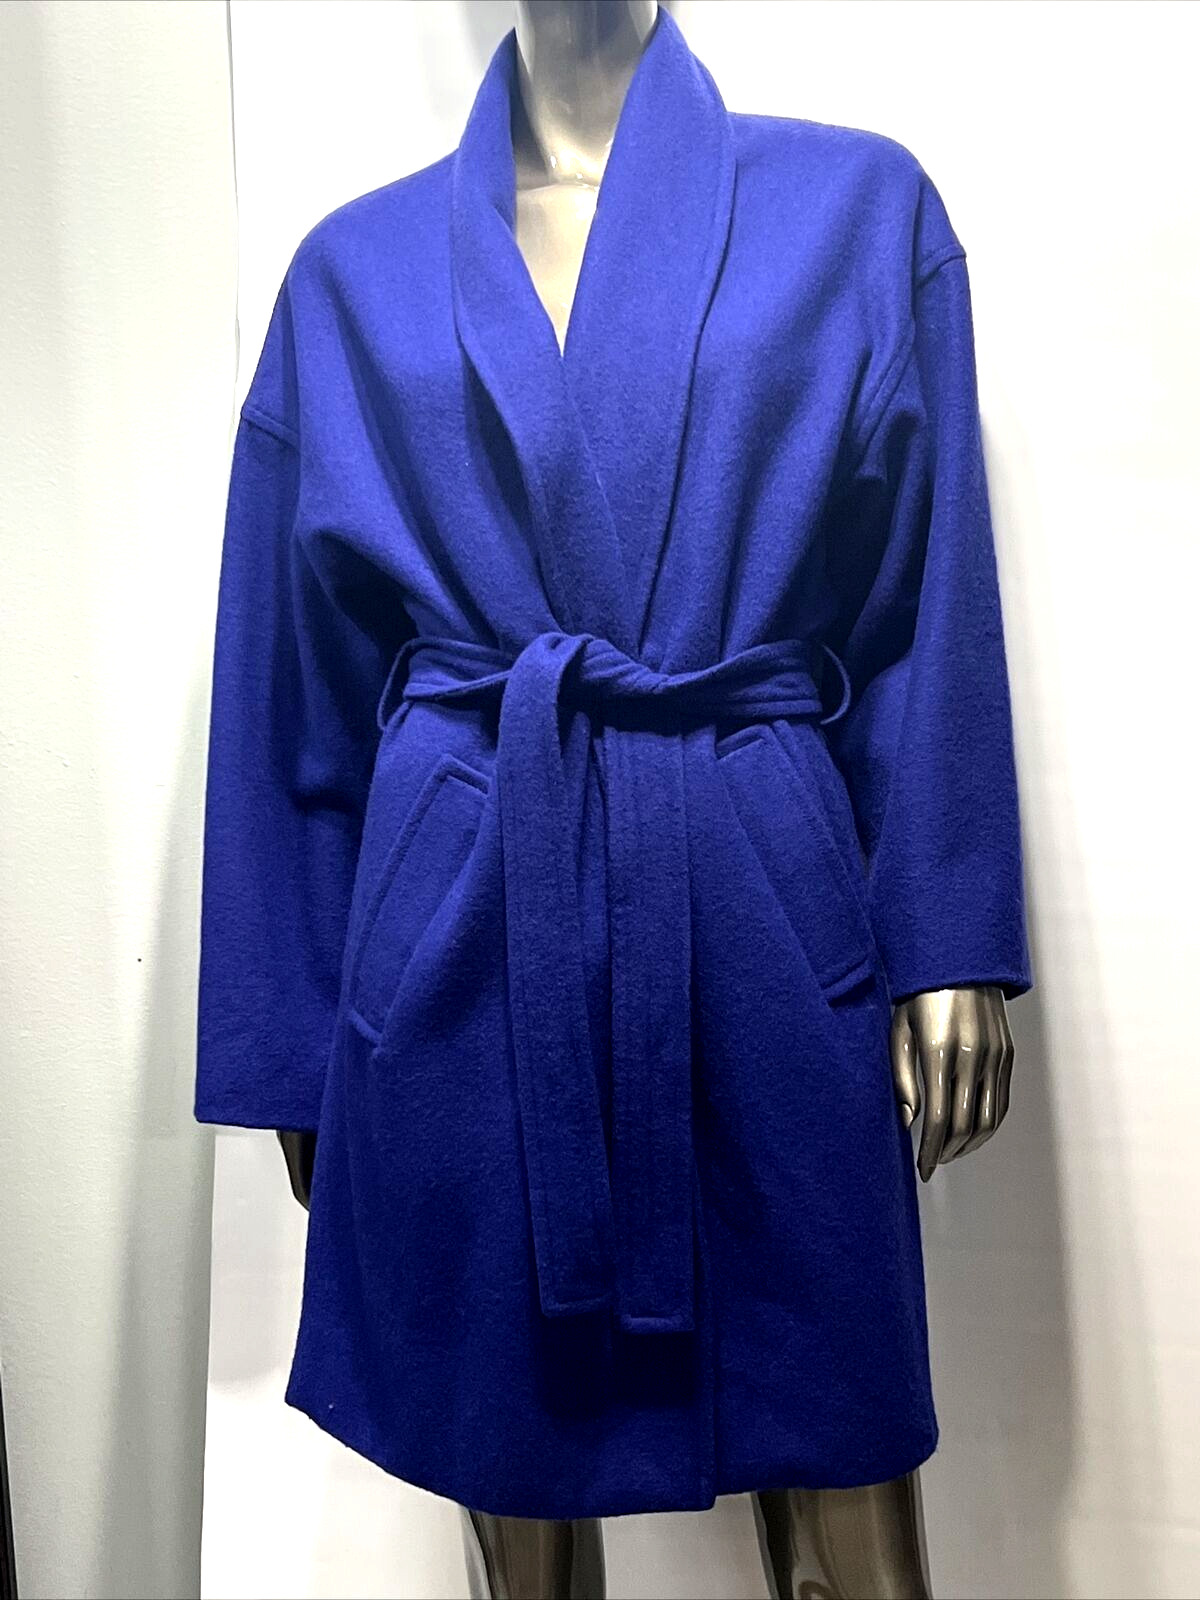 Narciso Rodriguez Coat  Womens Wrap Coat Cobalt Blue Belted  Mid Length Lined M